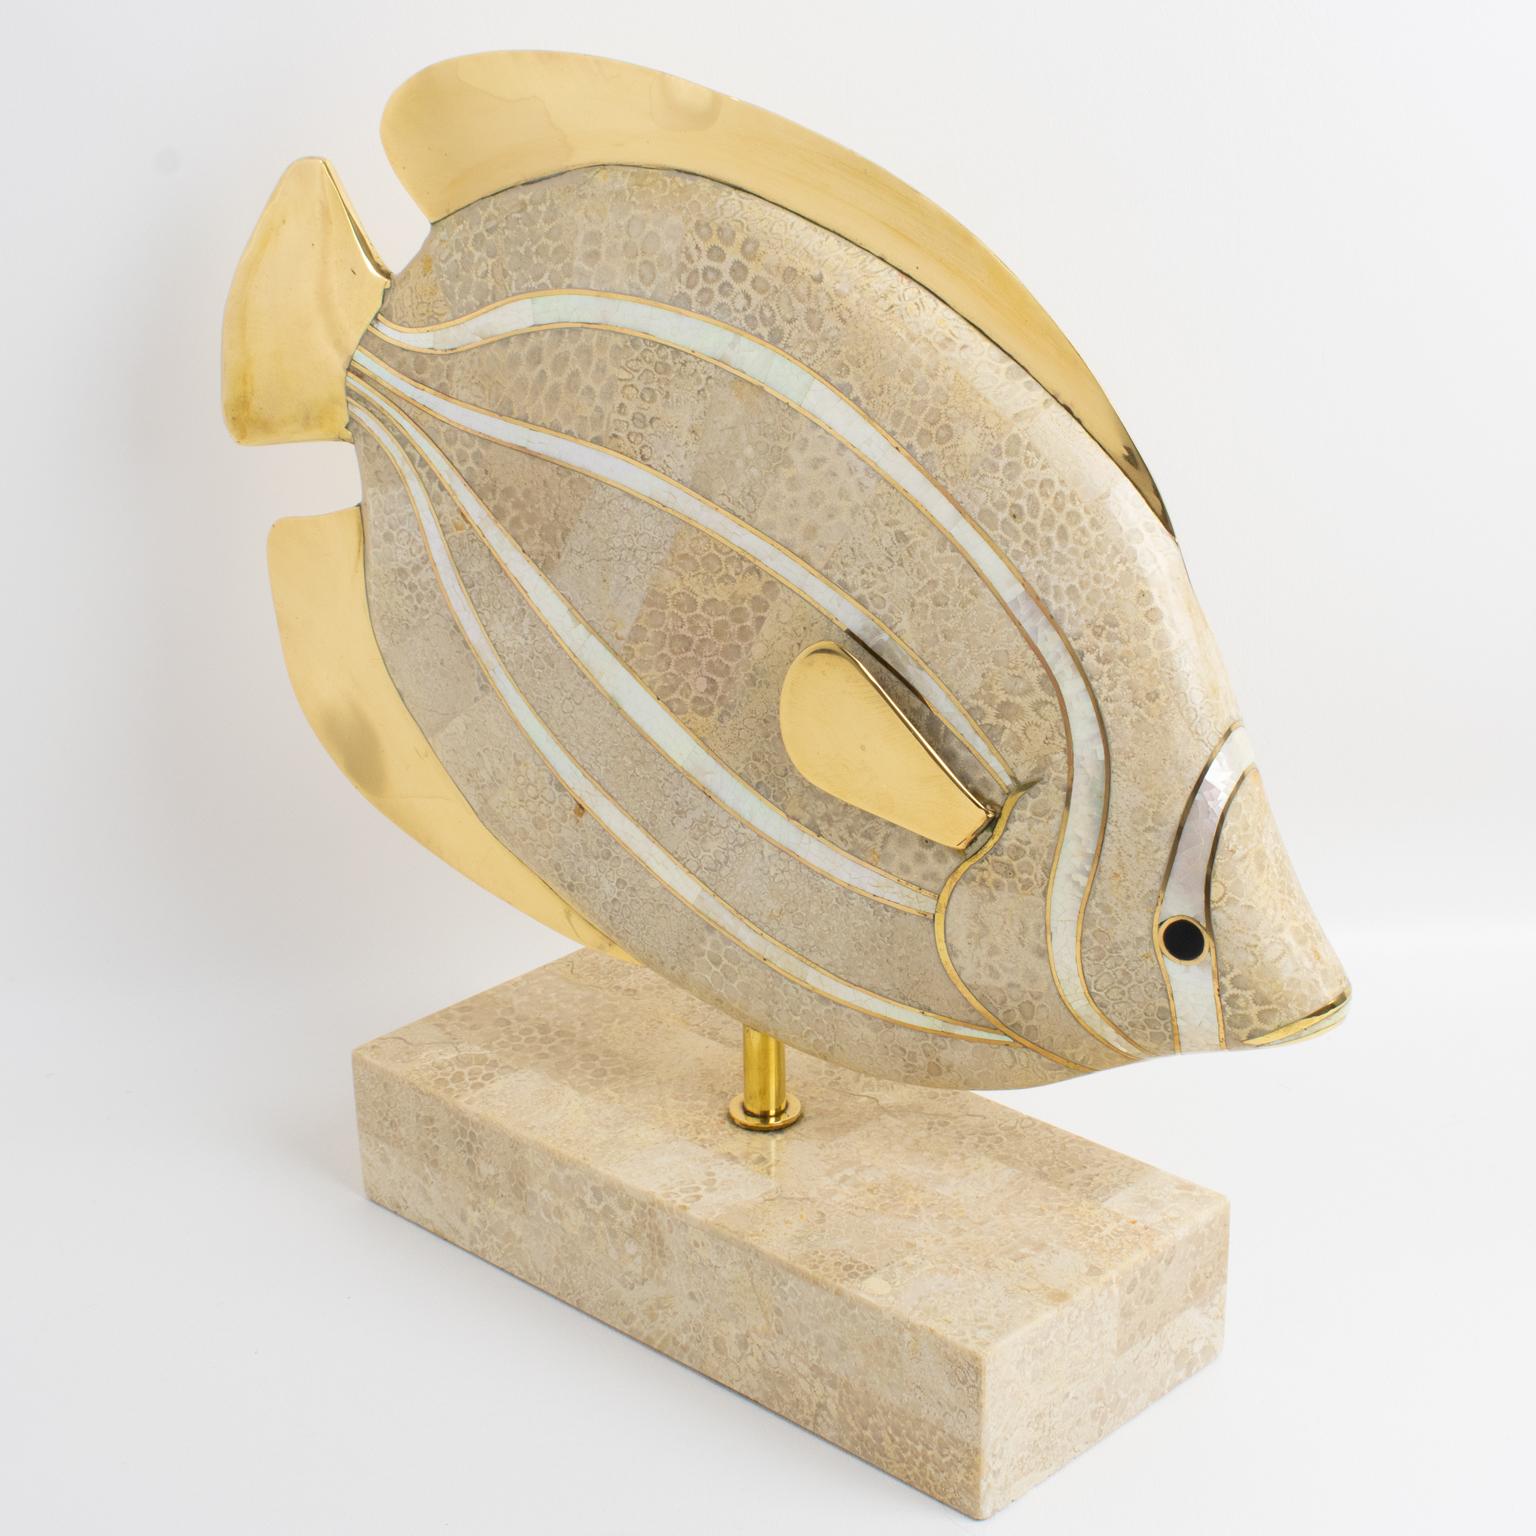 A beautiful sculpture designed by Maitland-Smith, and featuring an oversized fish. The fish table sculpture is made of stone veneered (marble and travertine) with gilded brass and seashell inlaid. The fish has a precious black stone eye on each